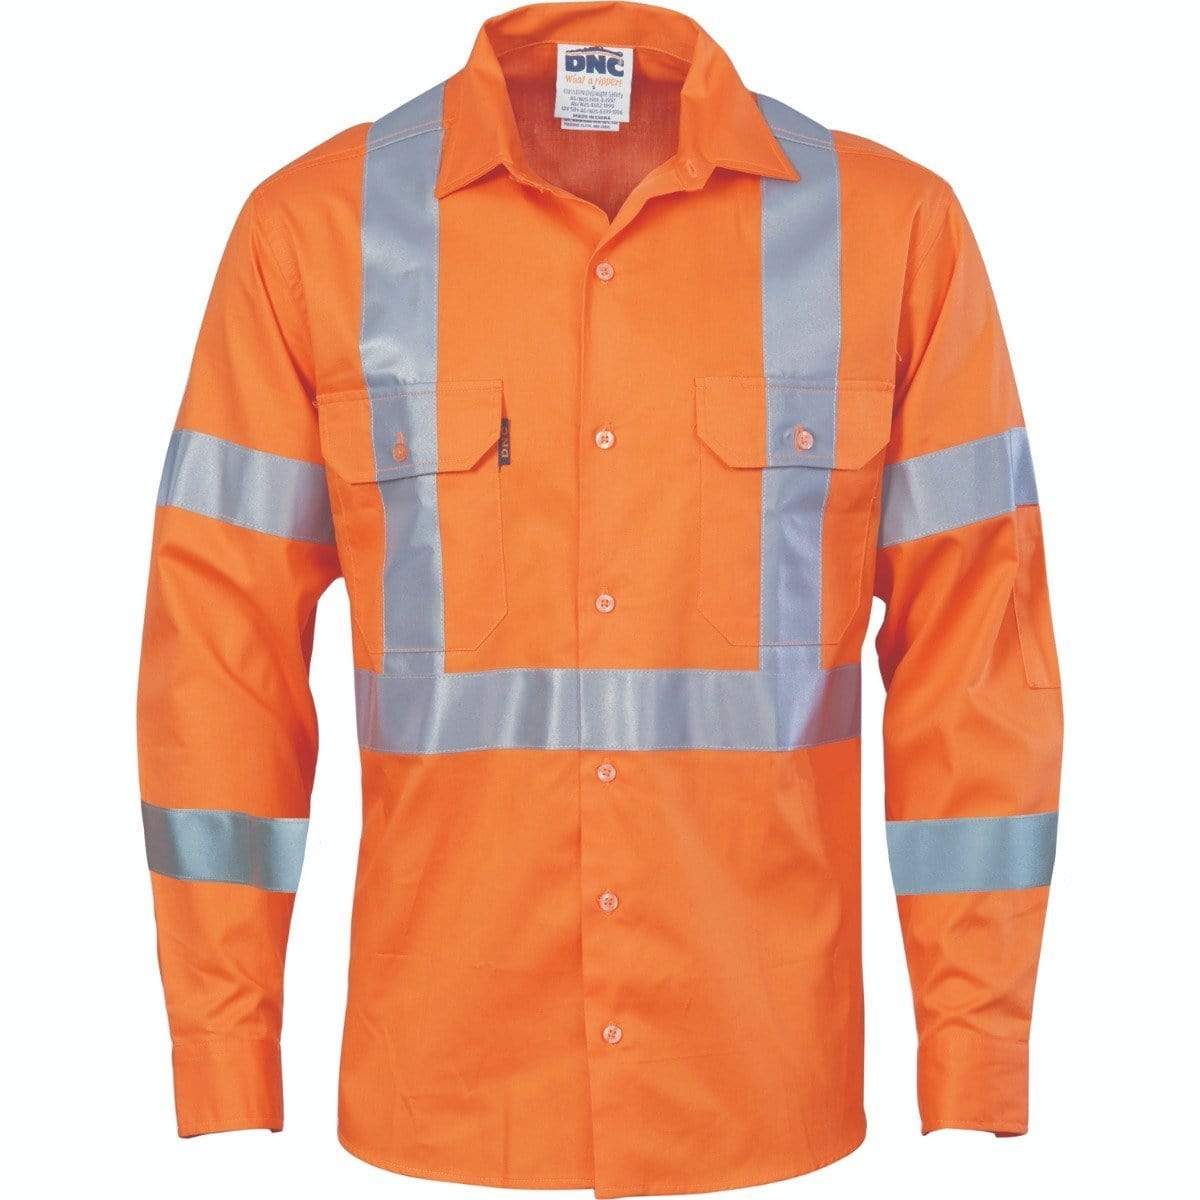 DNC Workwear Work Wear DNC WORKWEAR Hi-Vis Cool-Breeze Long Sleeve Cotton Shirt with Double Hoop on Arms & 'X' Back CSR R/Tape 3789